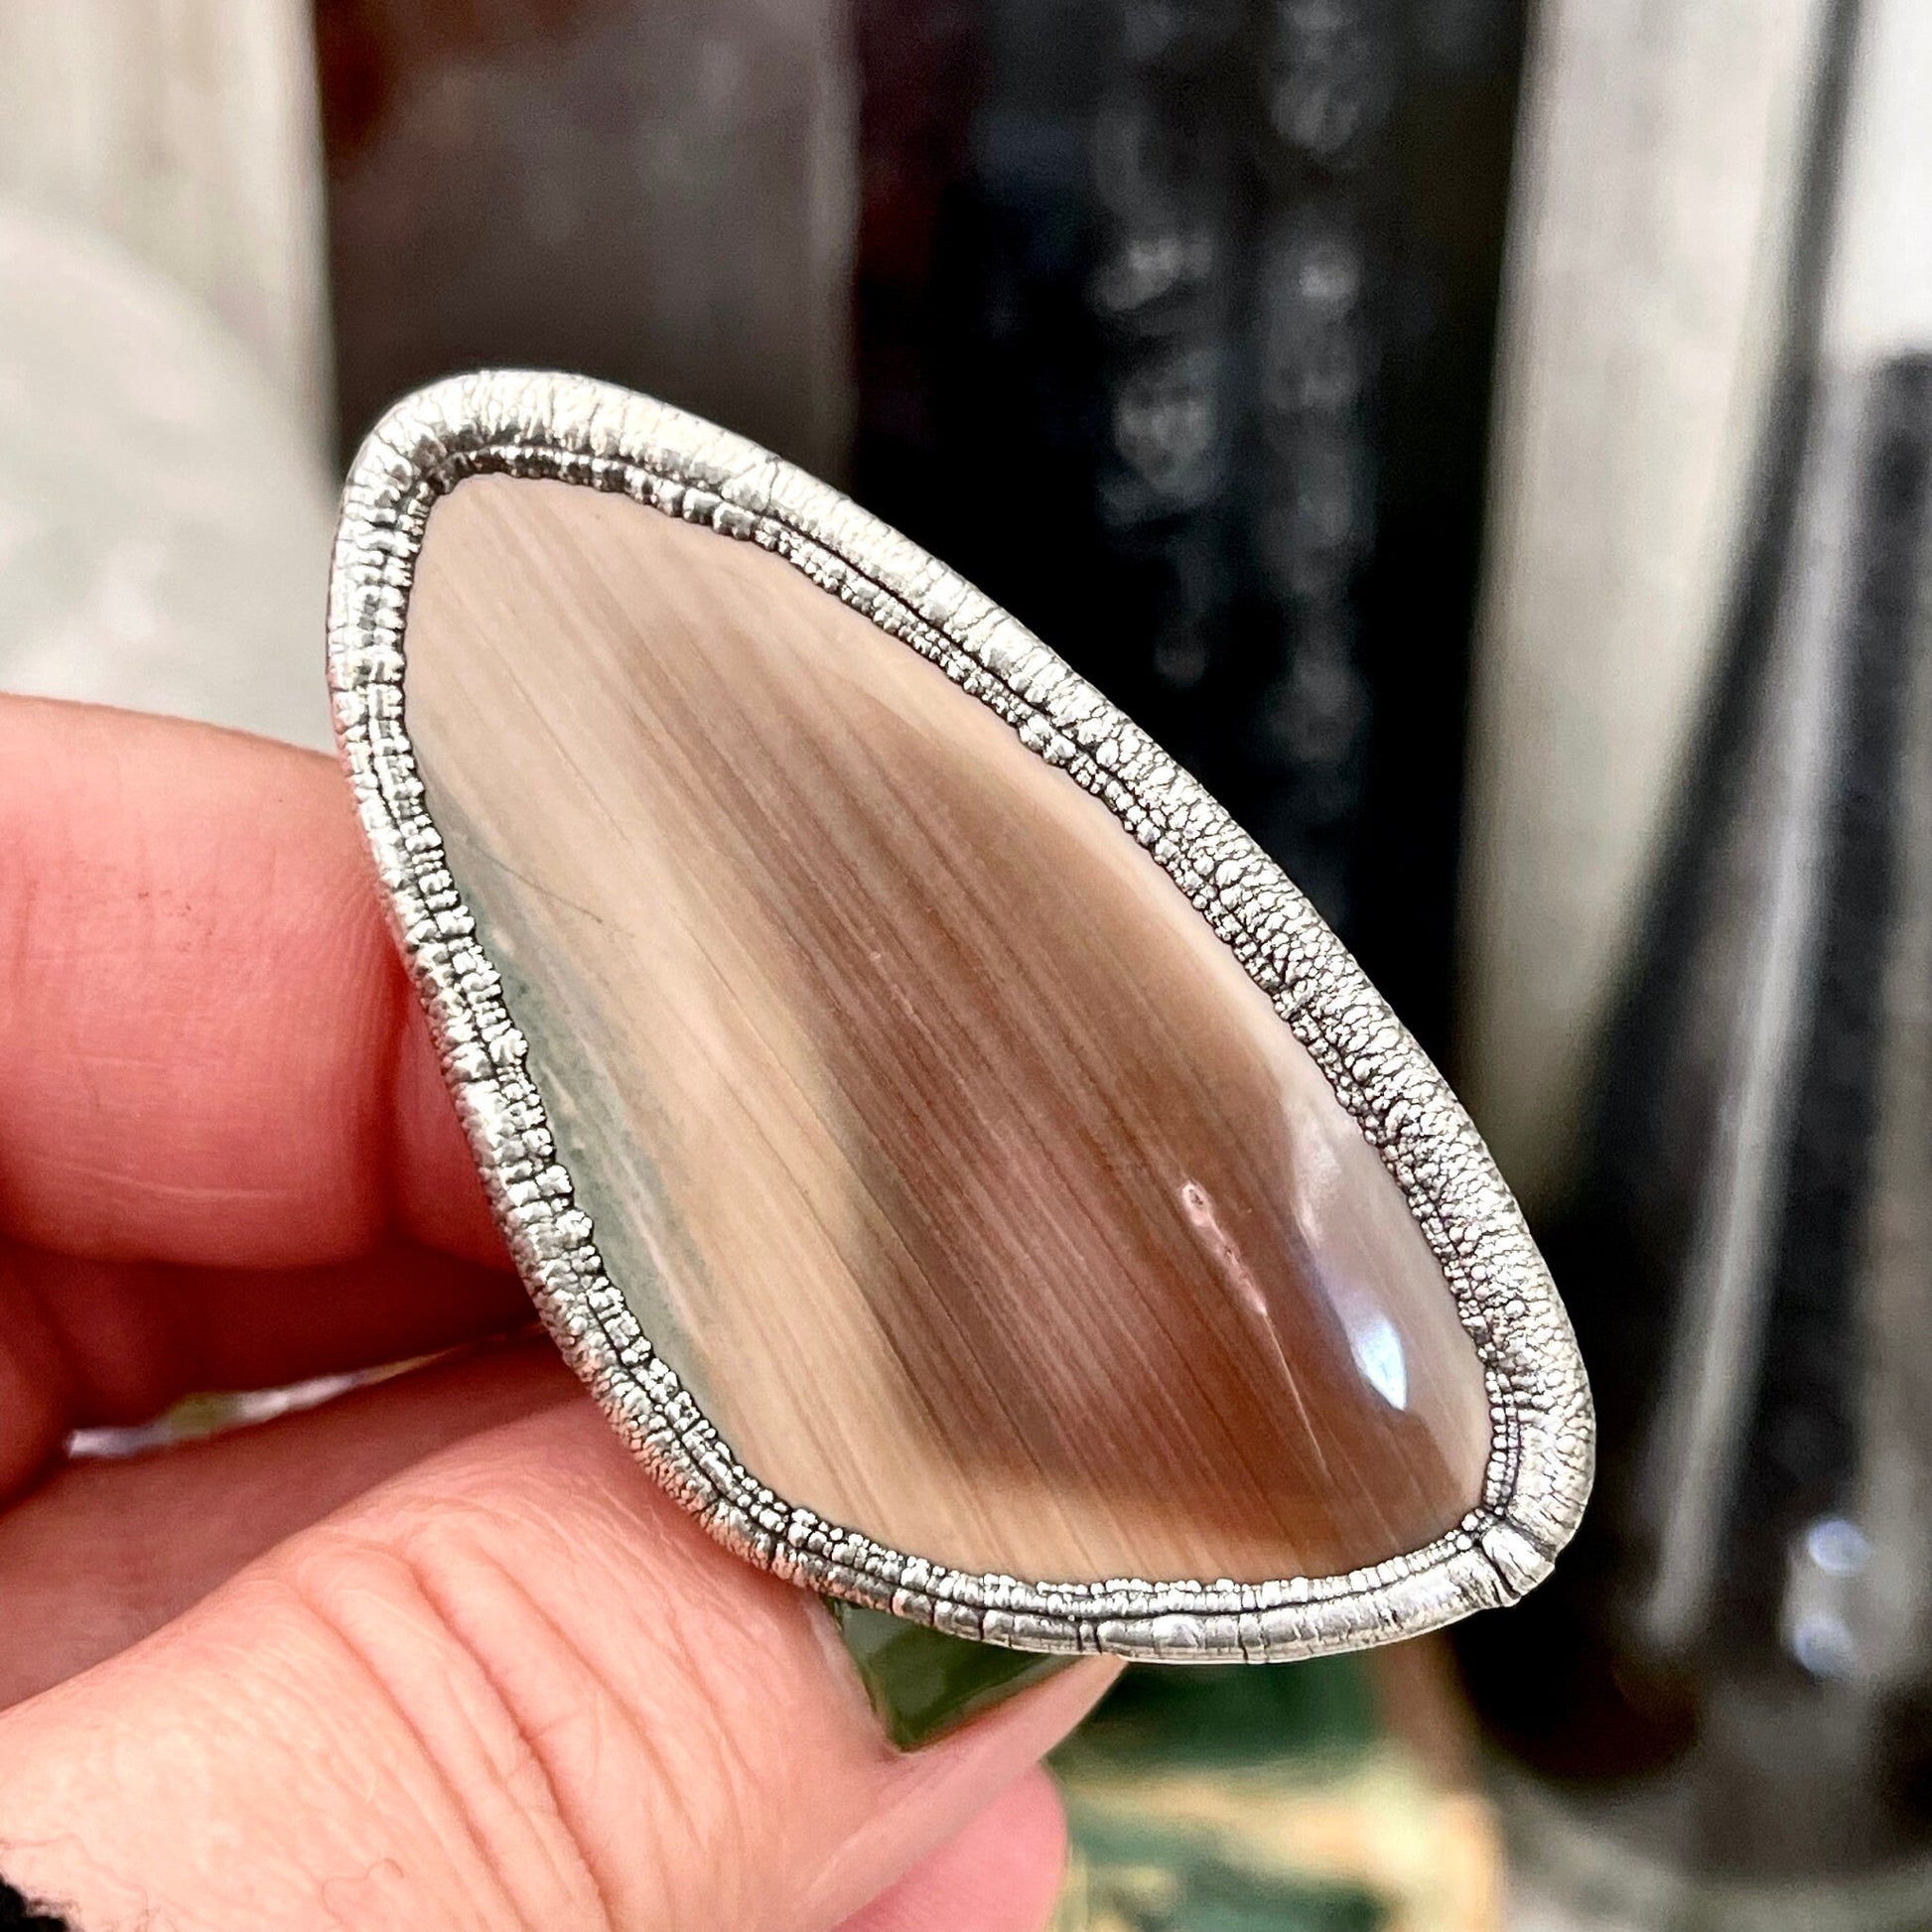 Discounted - Scratch on stone Size 9.5 Large Imperial Jasper Statement Ring in Fine Silver / Foxlark Collection - One of a Kind